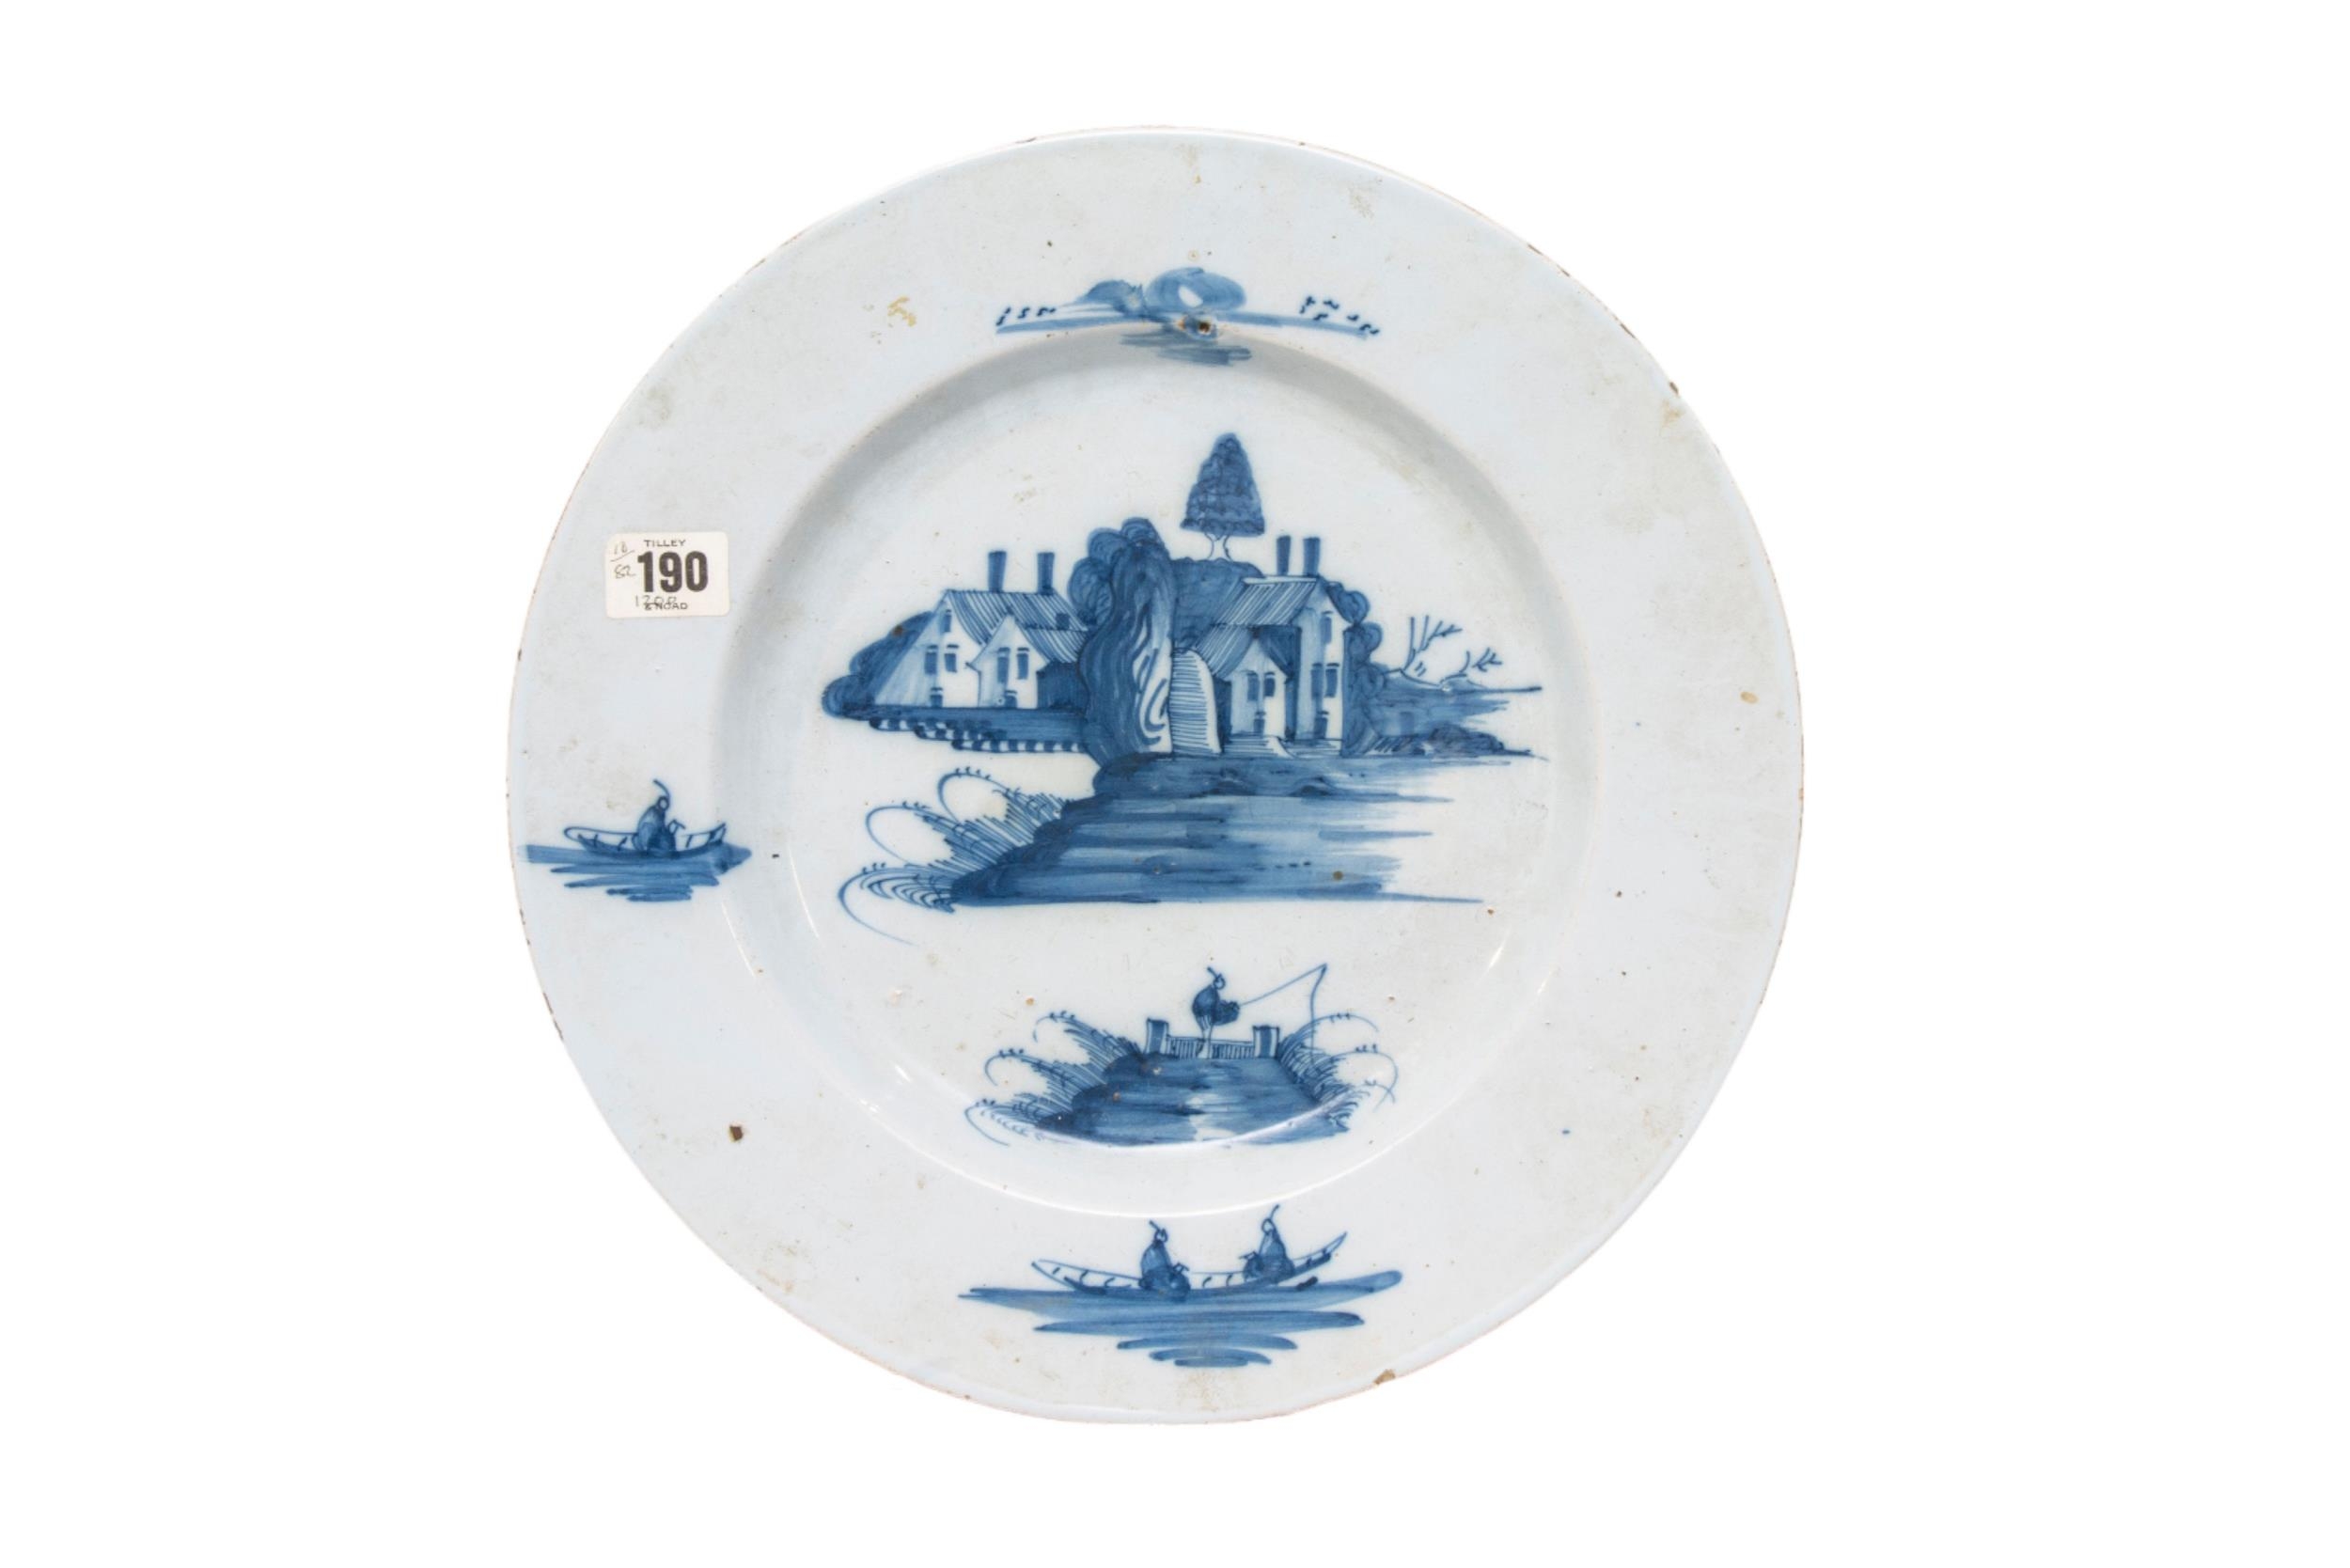 THREE LARGE DELFT DISHES, 18TH CENTURY, consisting of two dishes painted with traditional rural - Image 3 of 4